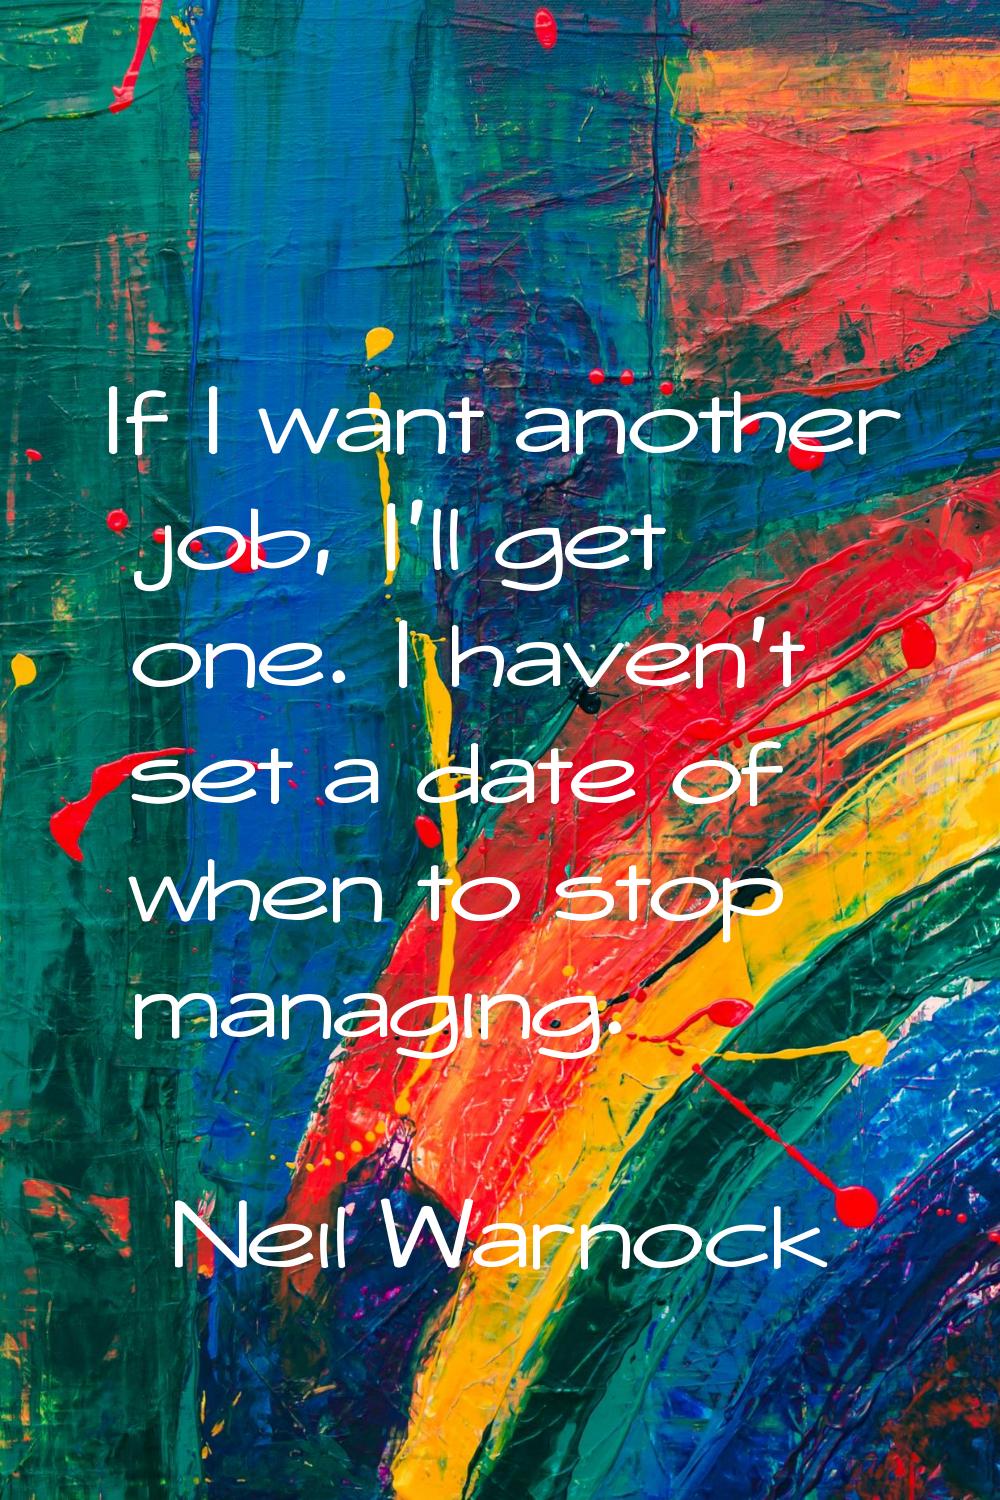 If I want another job, I'll get one. I haven't set a date of when to stop managing.